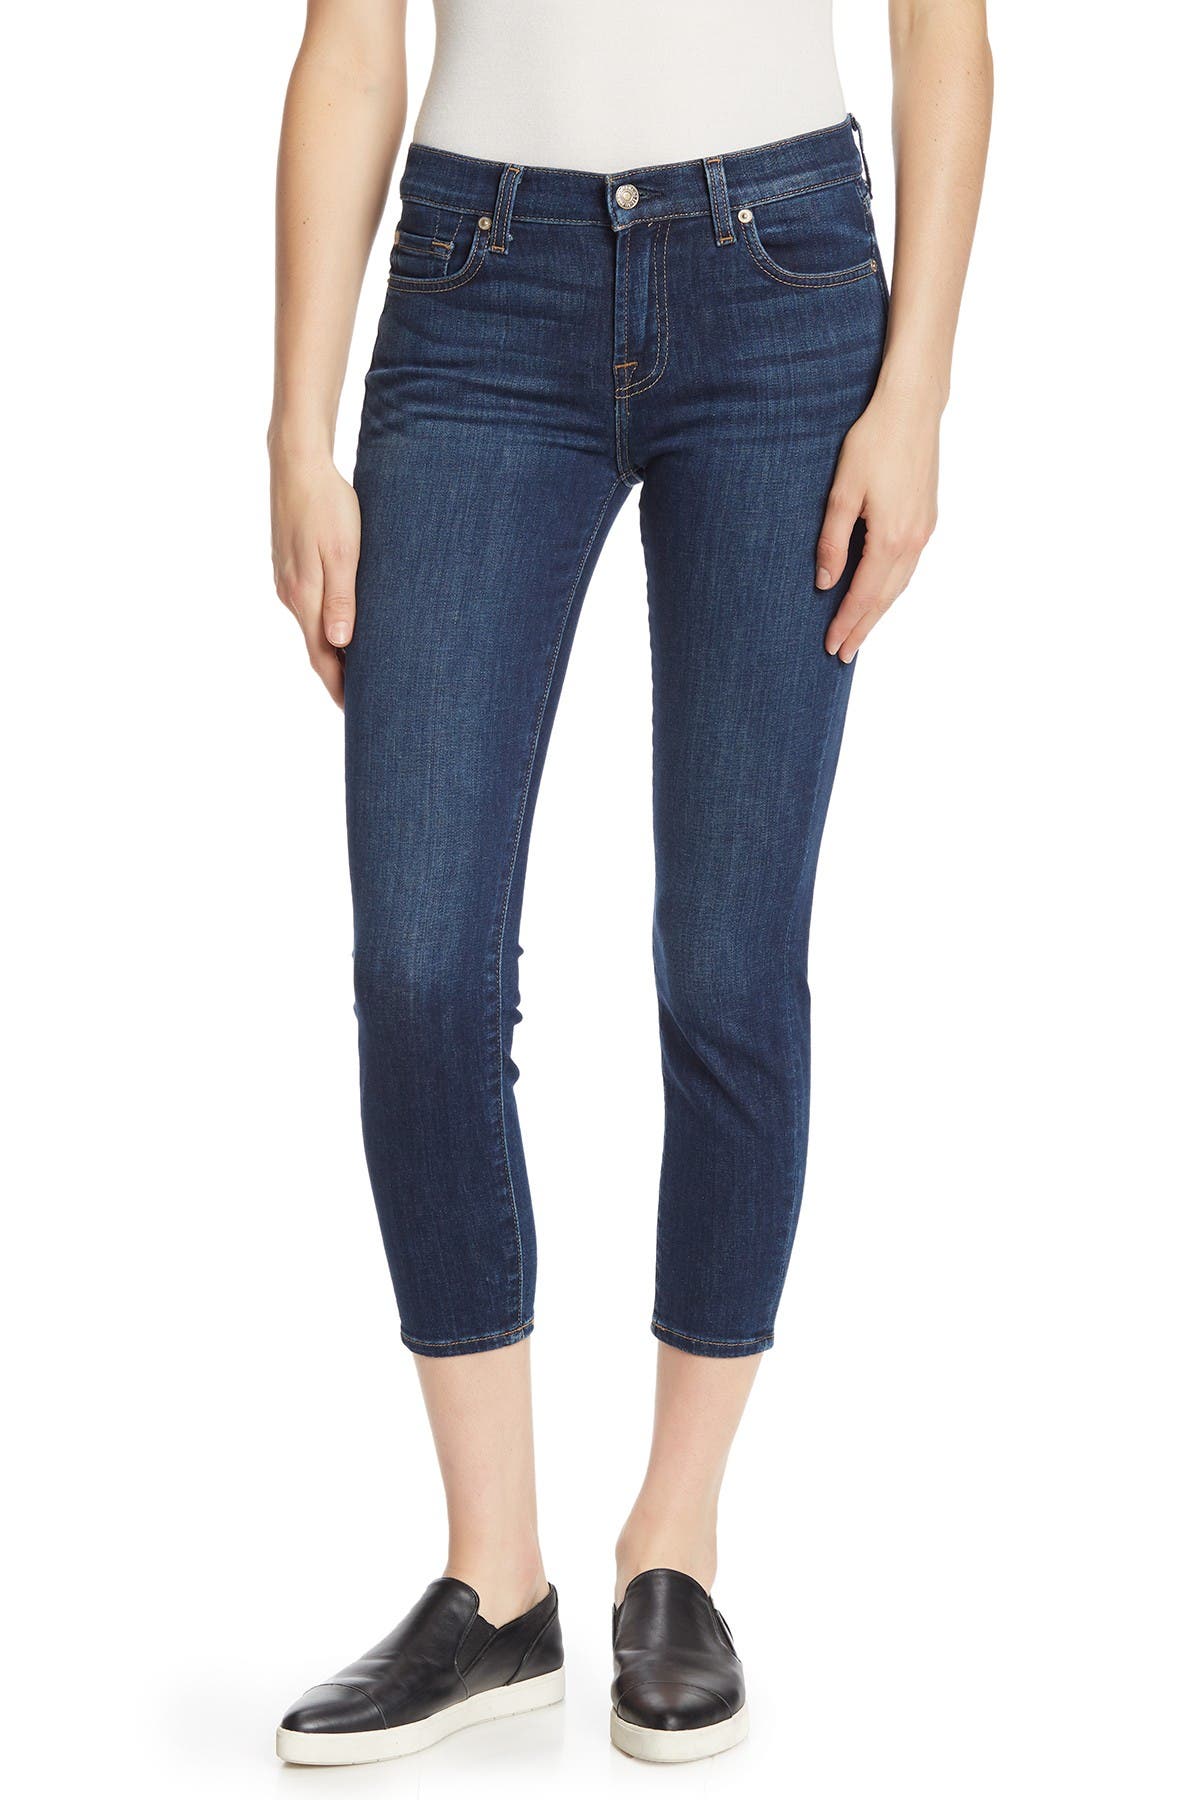 nordstrom seven for all mankind